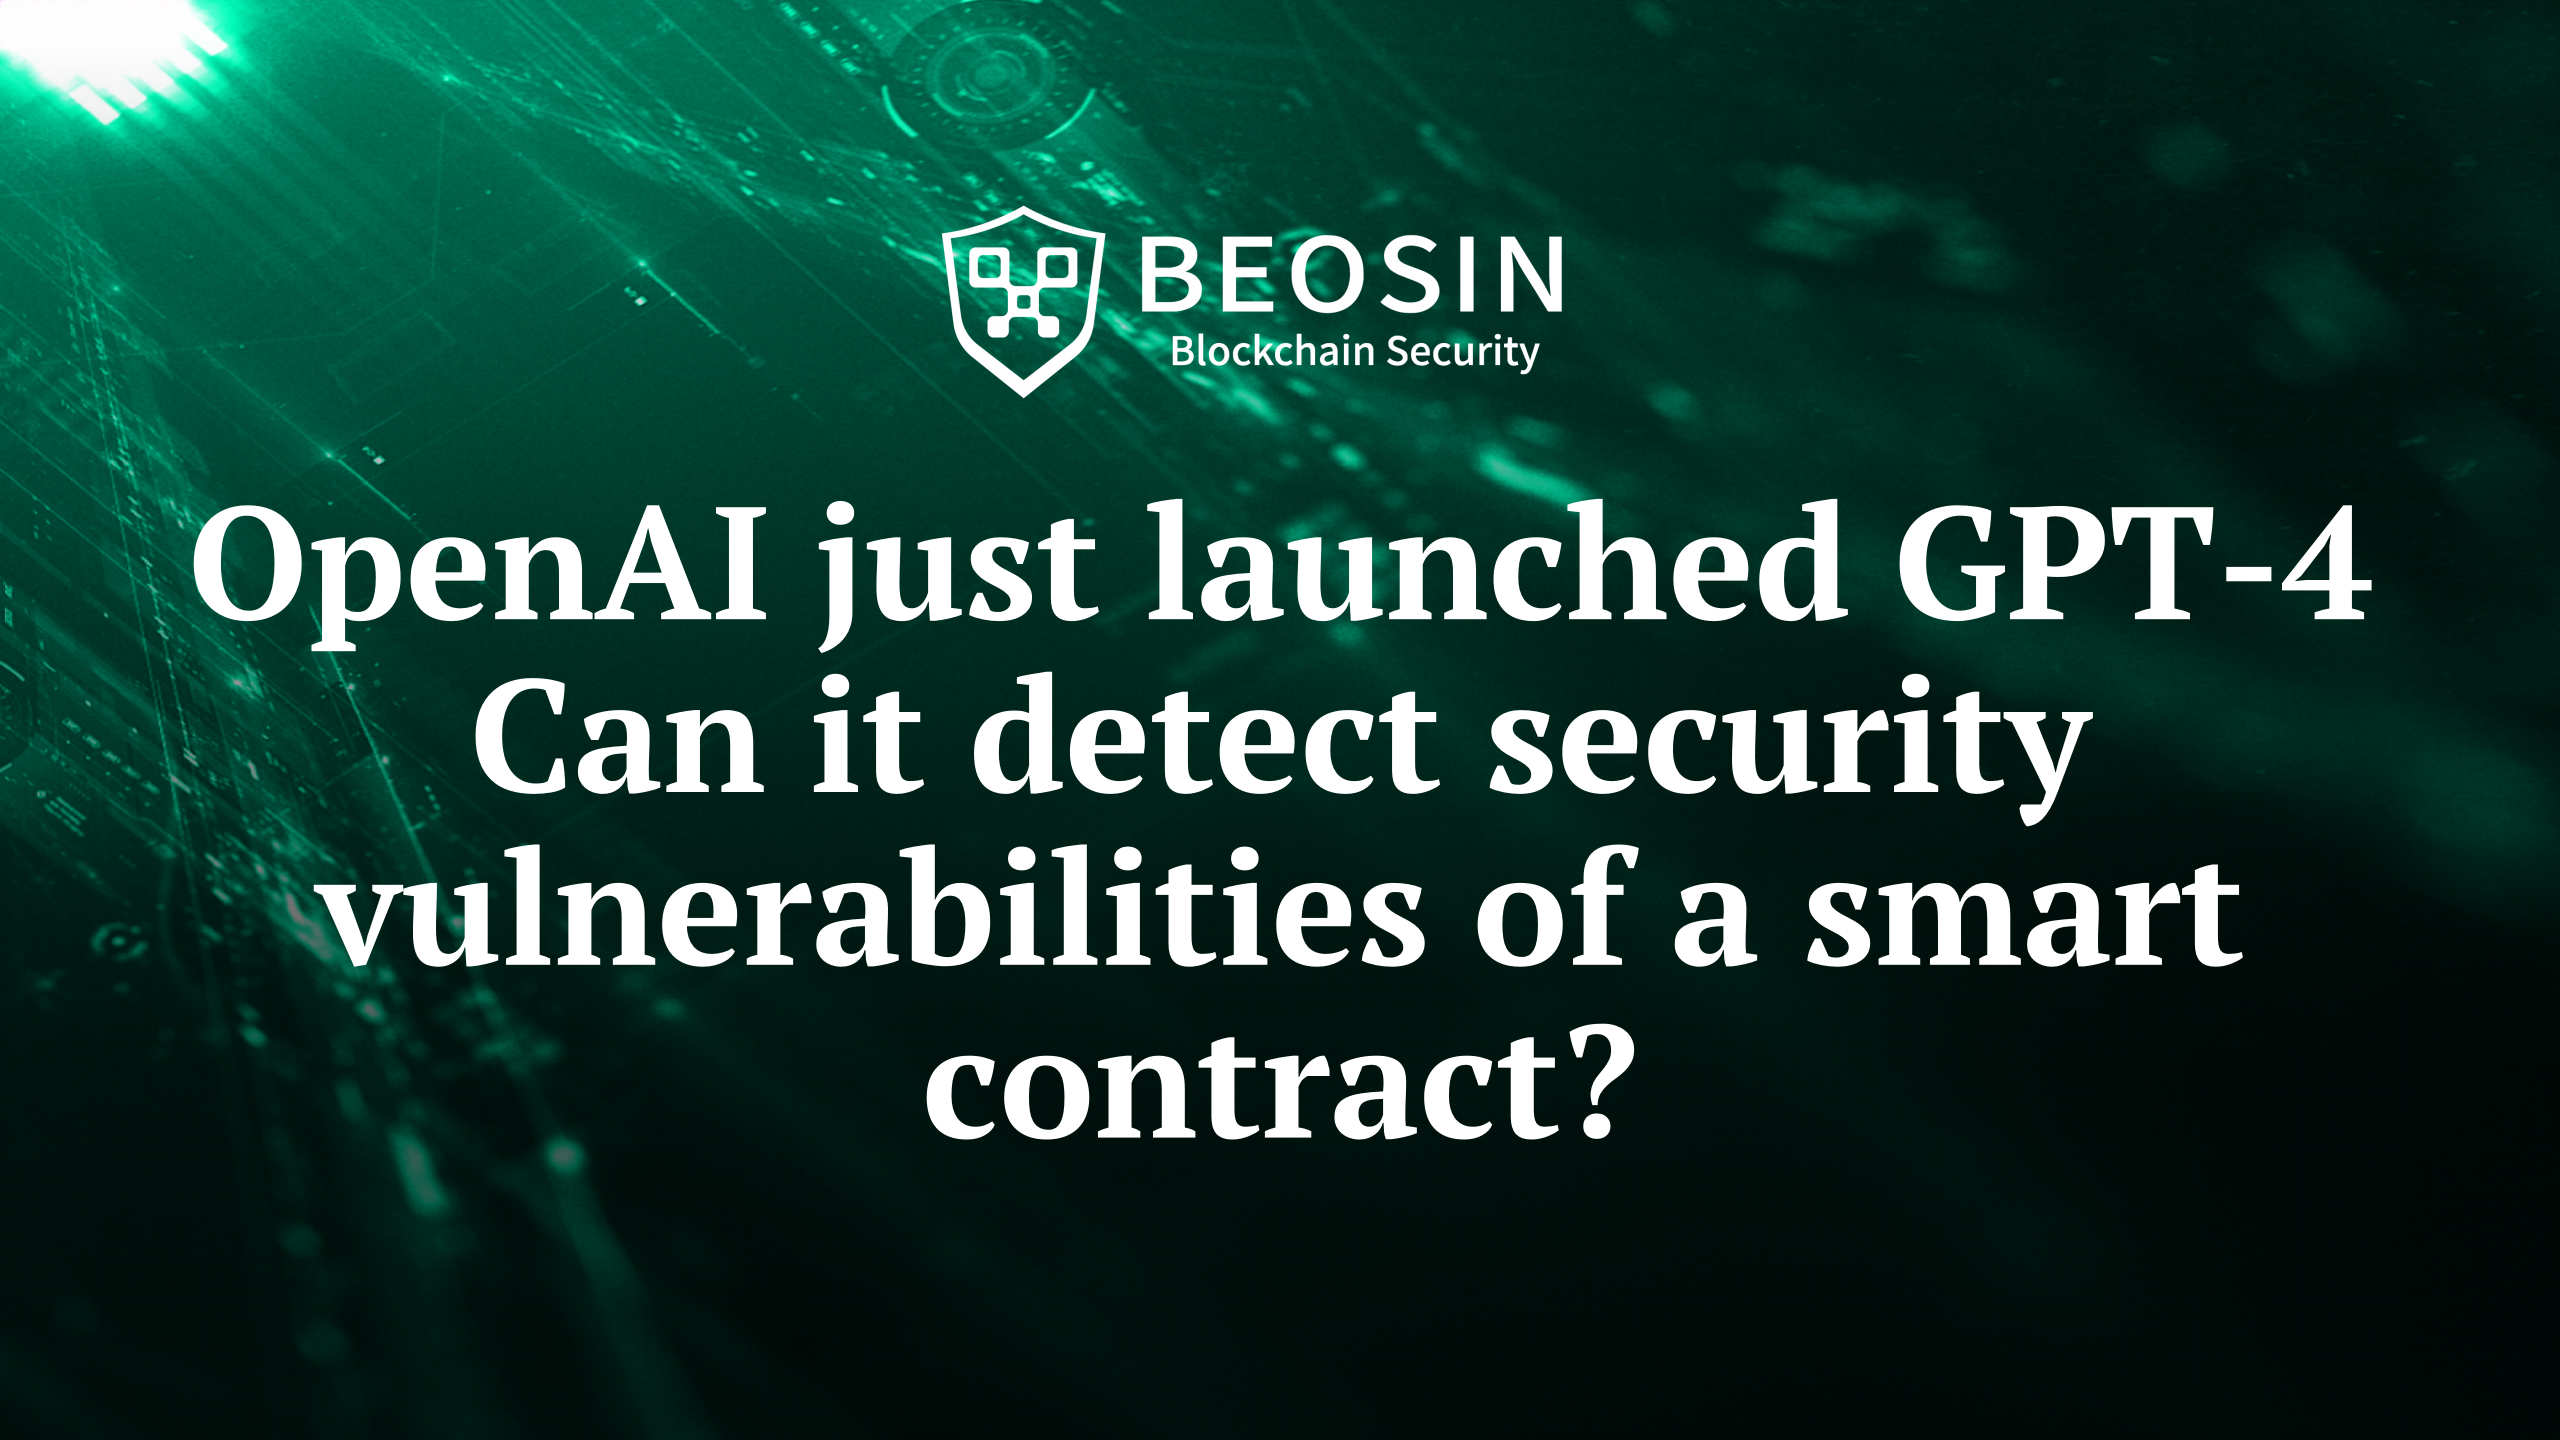 OpenAI just launched GPT-4. Can it detect security vulnerabilities of a smart contract?